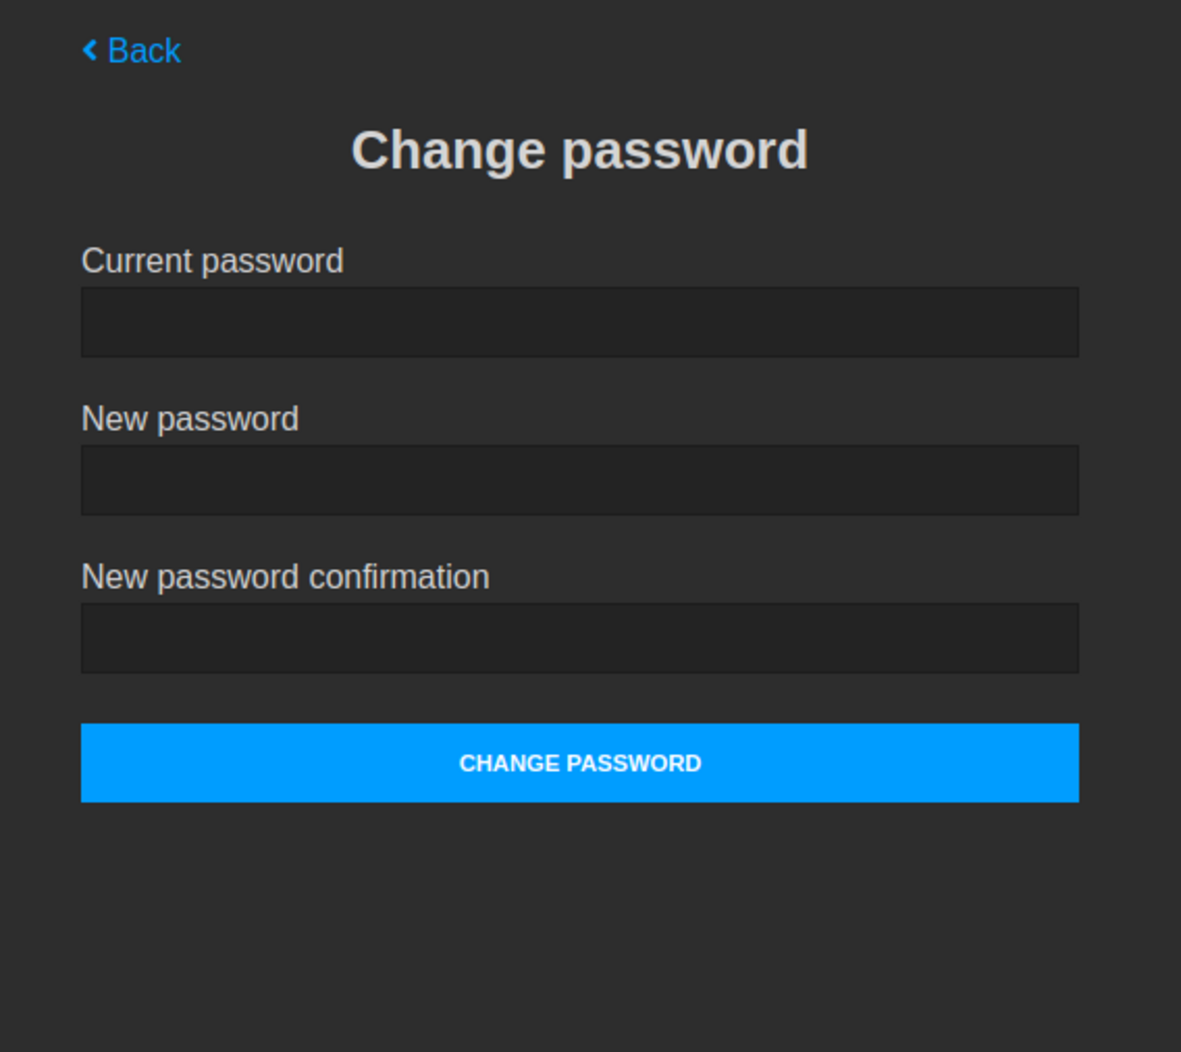 ../_images/change_password_form.png